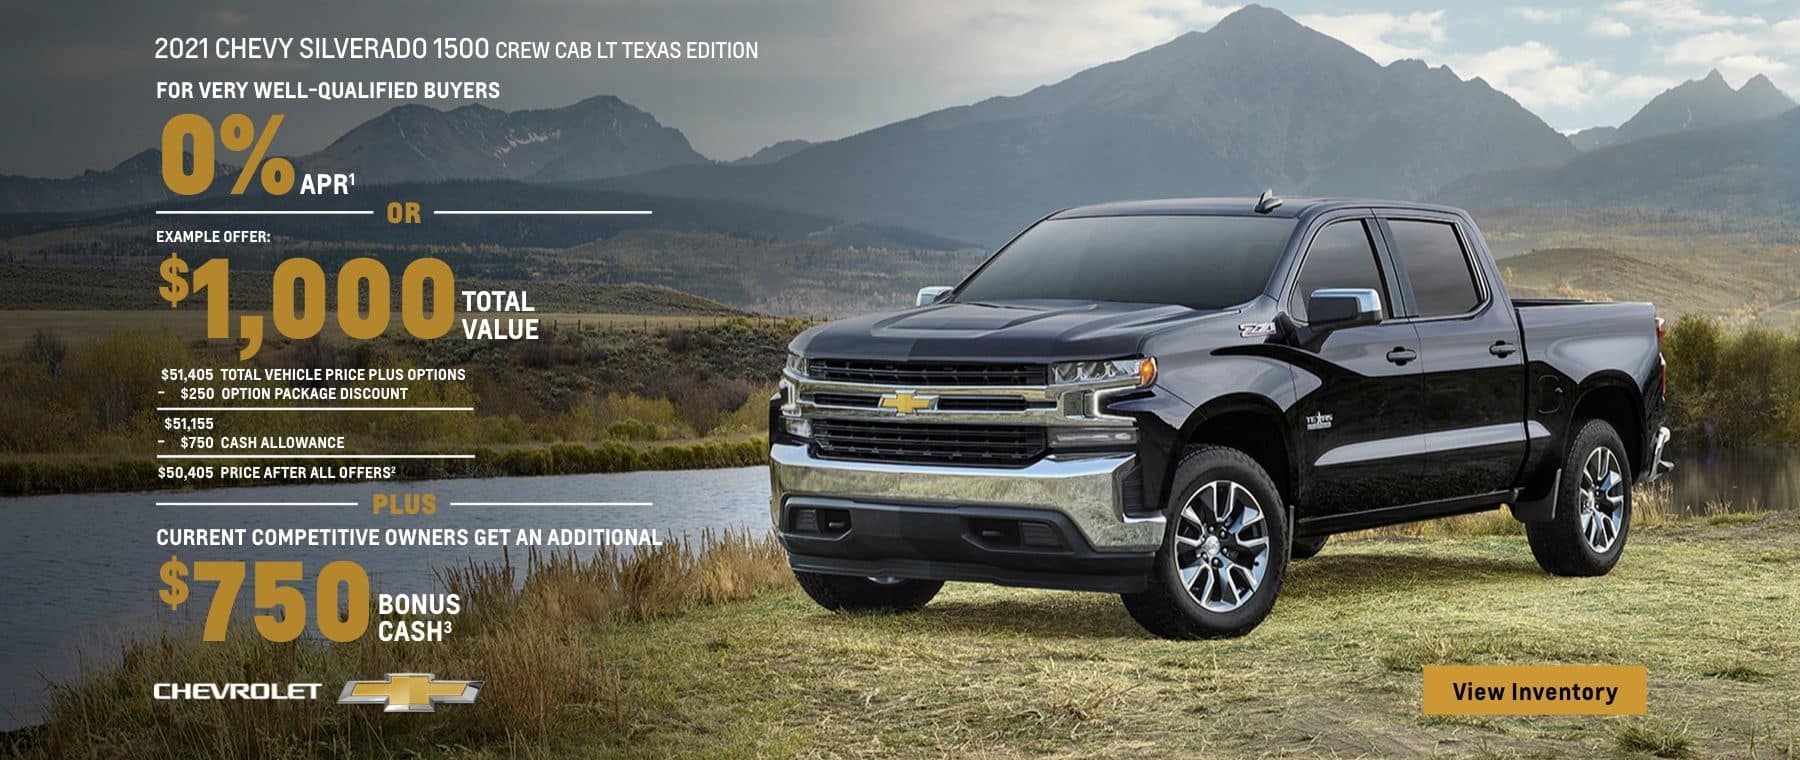 2021 Chevy Silverado 1500 Crew Cab LT Texas Edition. For very well-qualified buyers 0% APR. Or, example offer: $1,000 total value. Plus, current competitive owners get an additional $750 bonus cash.